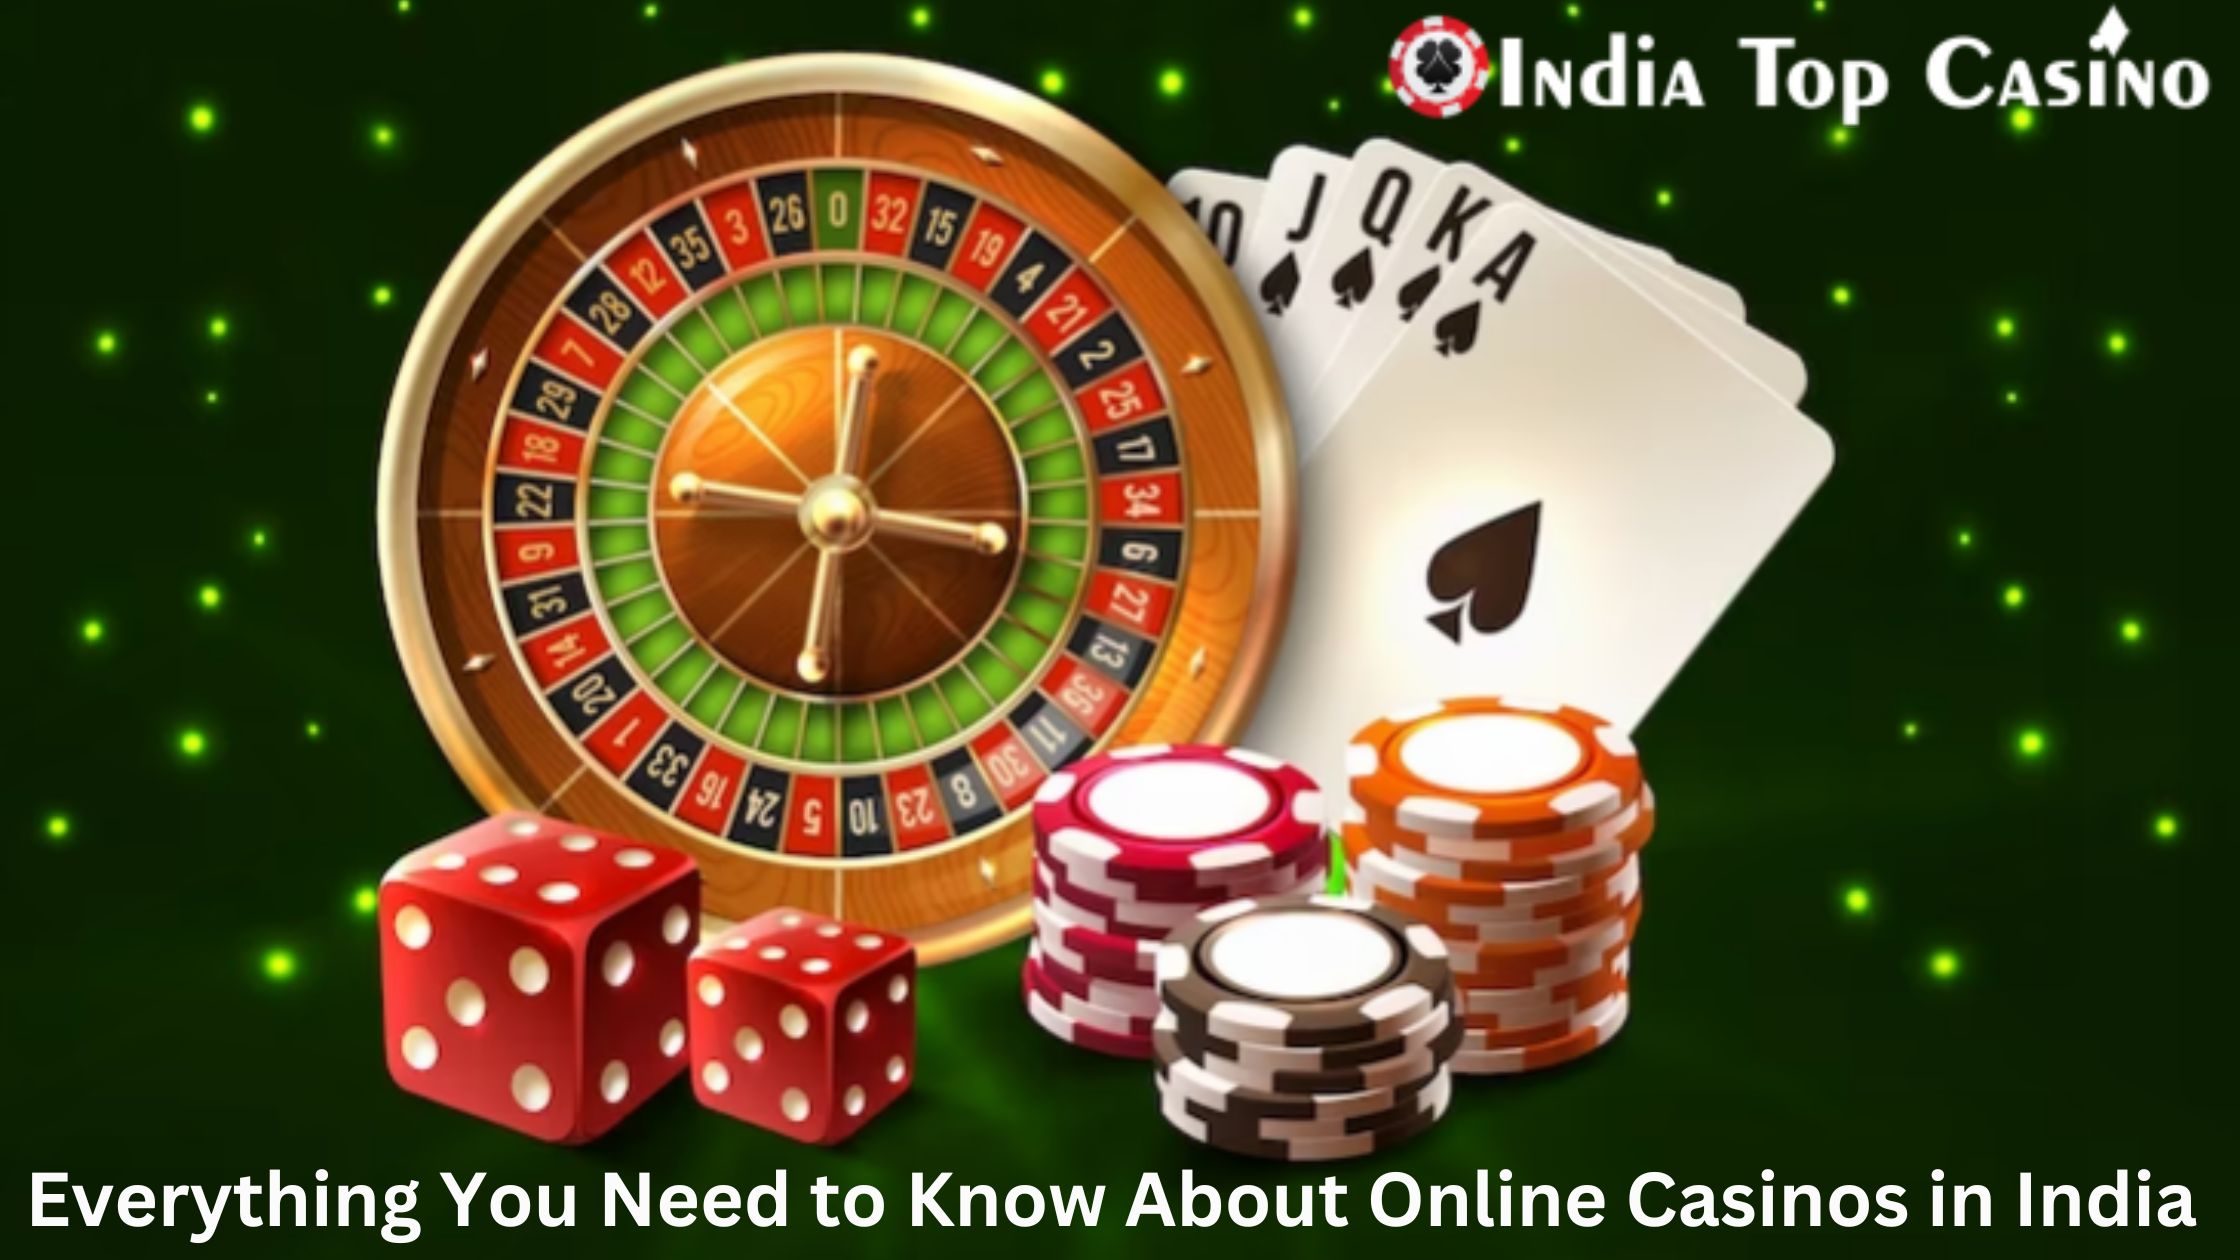 Must-Know Information on Online Casinos in India